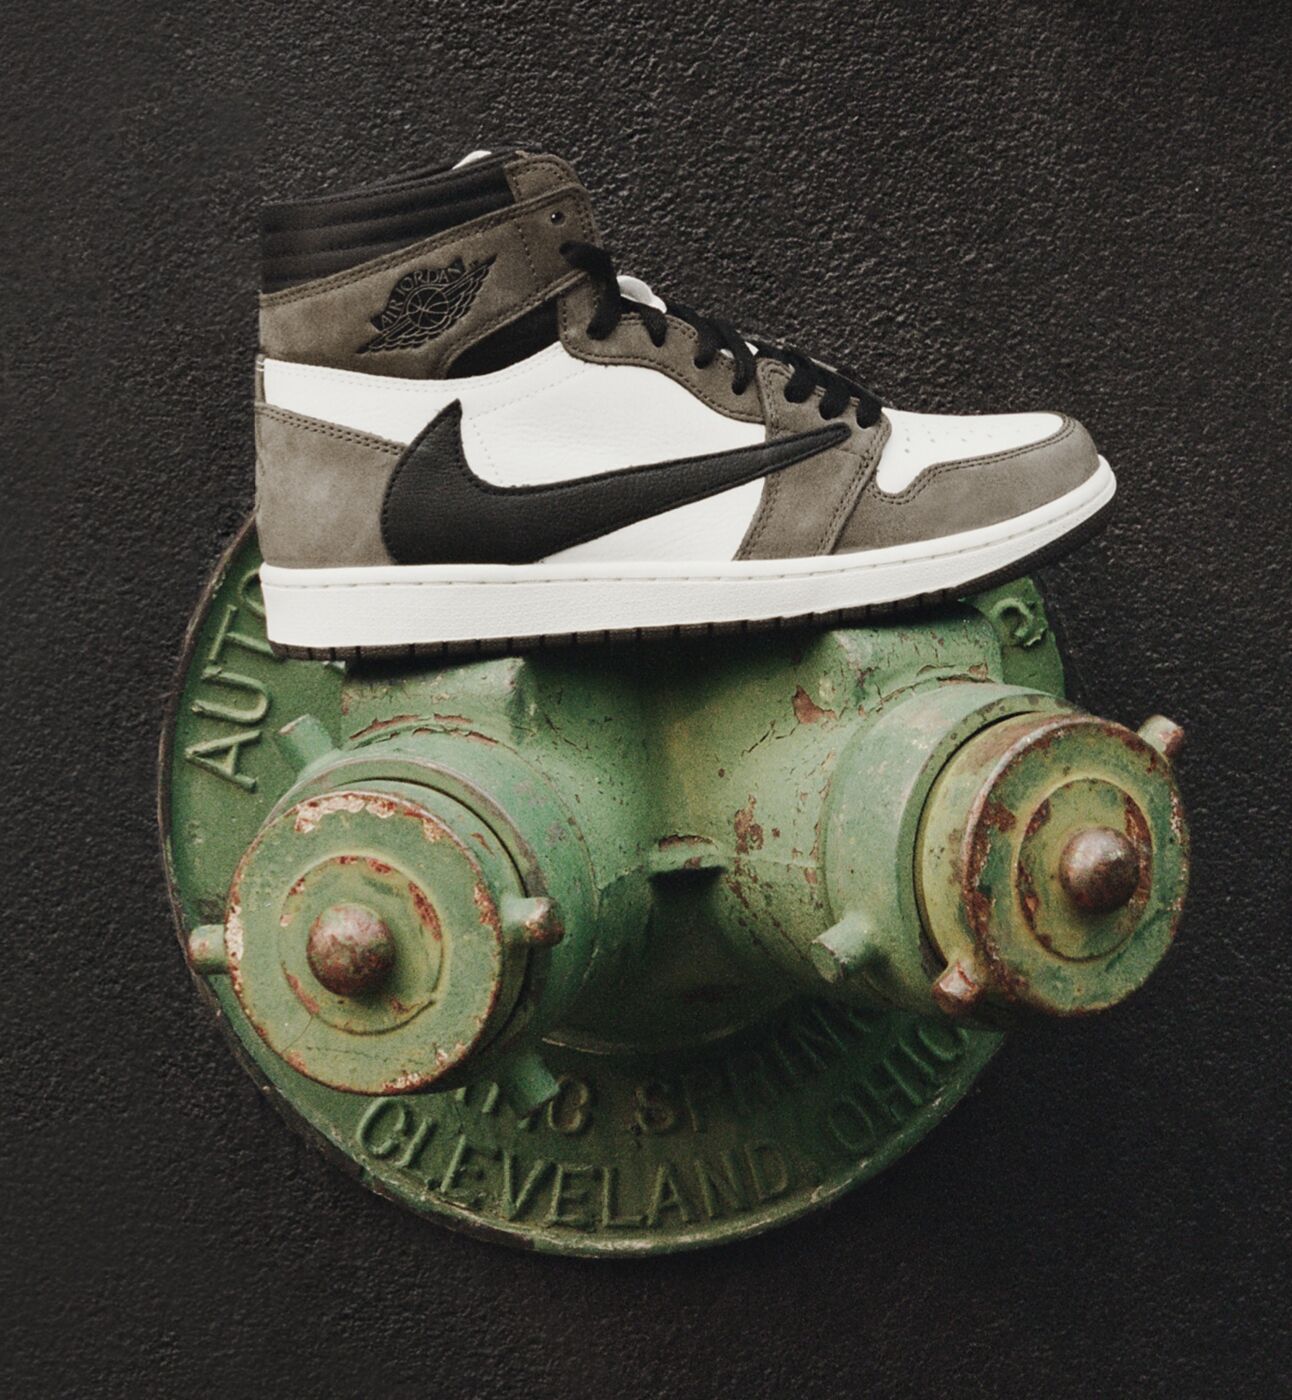 Nike Collaborations: Our Top 5 Picks - FARFETCH